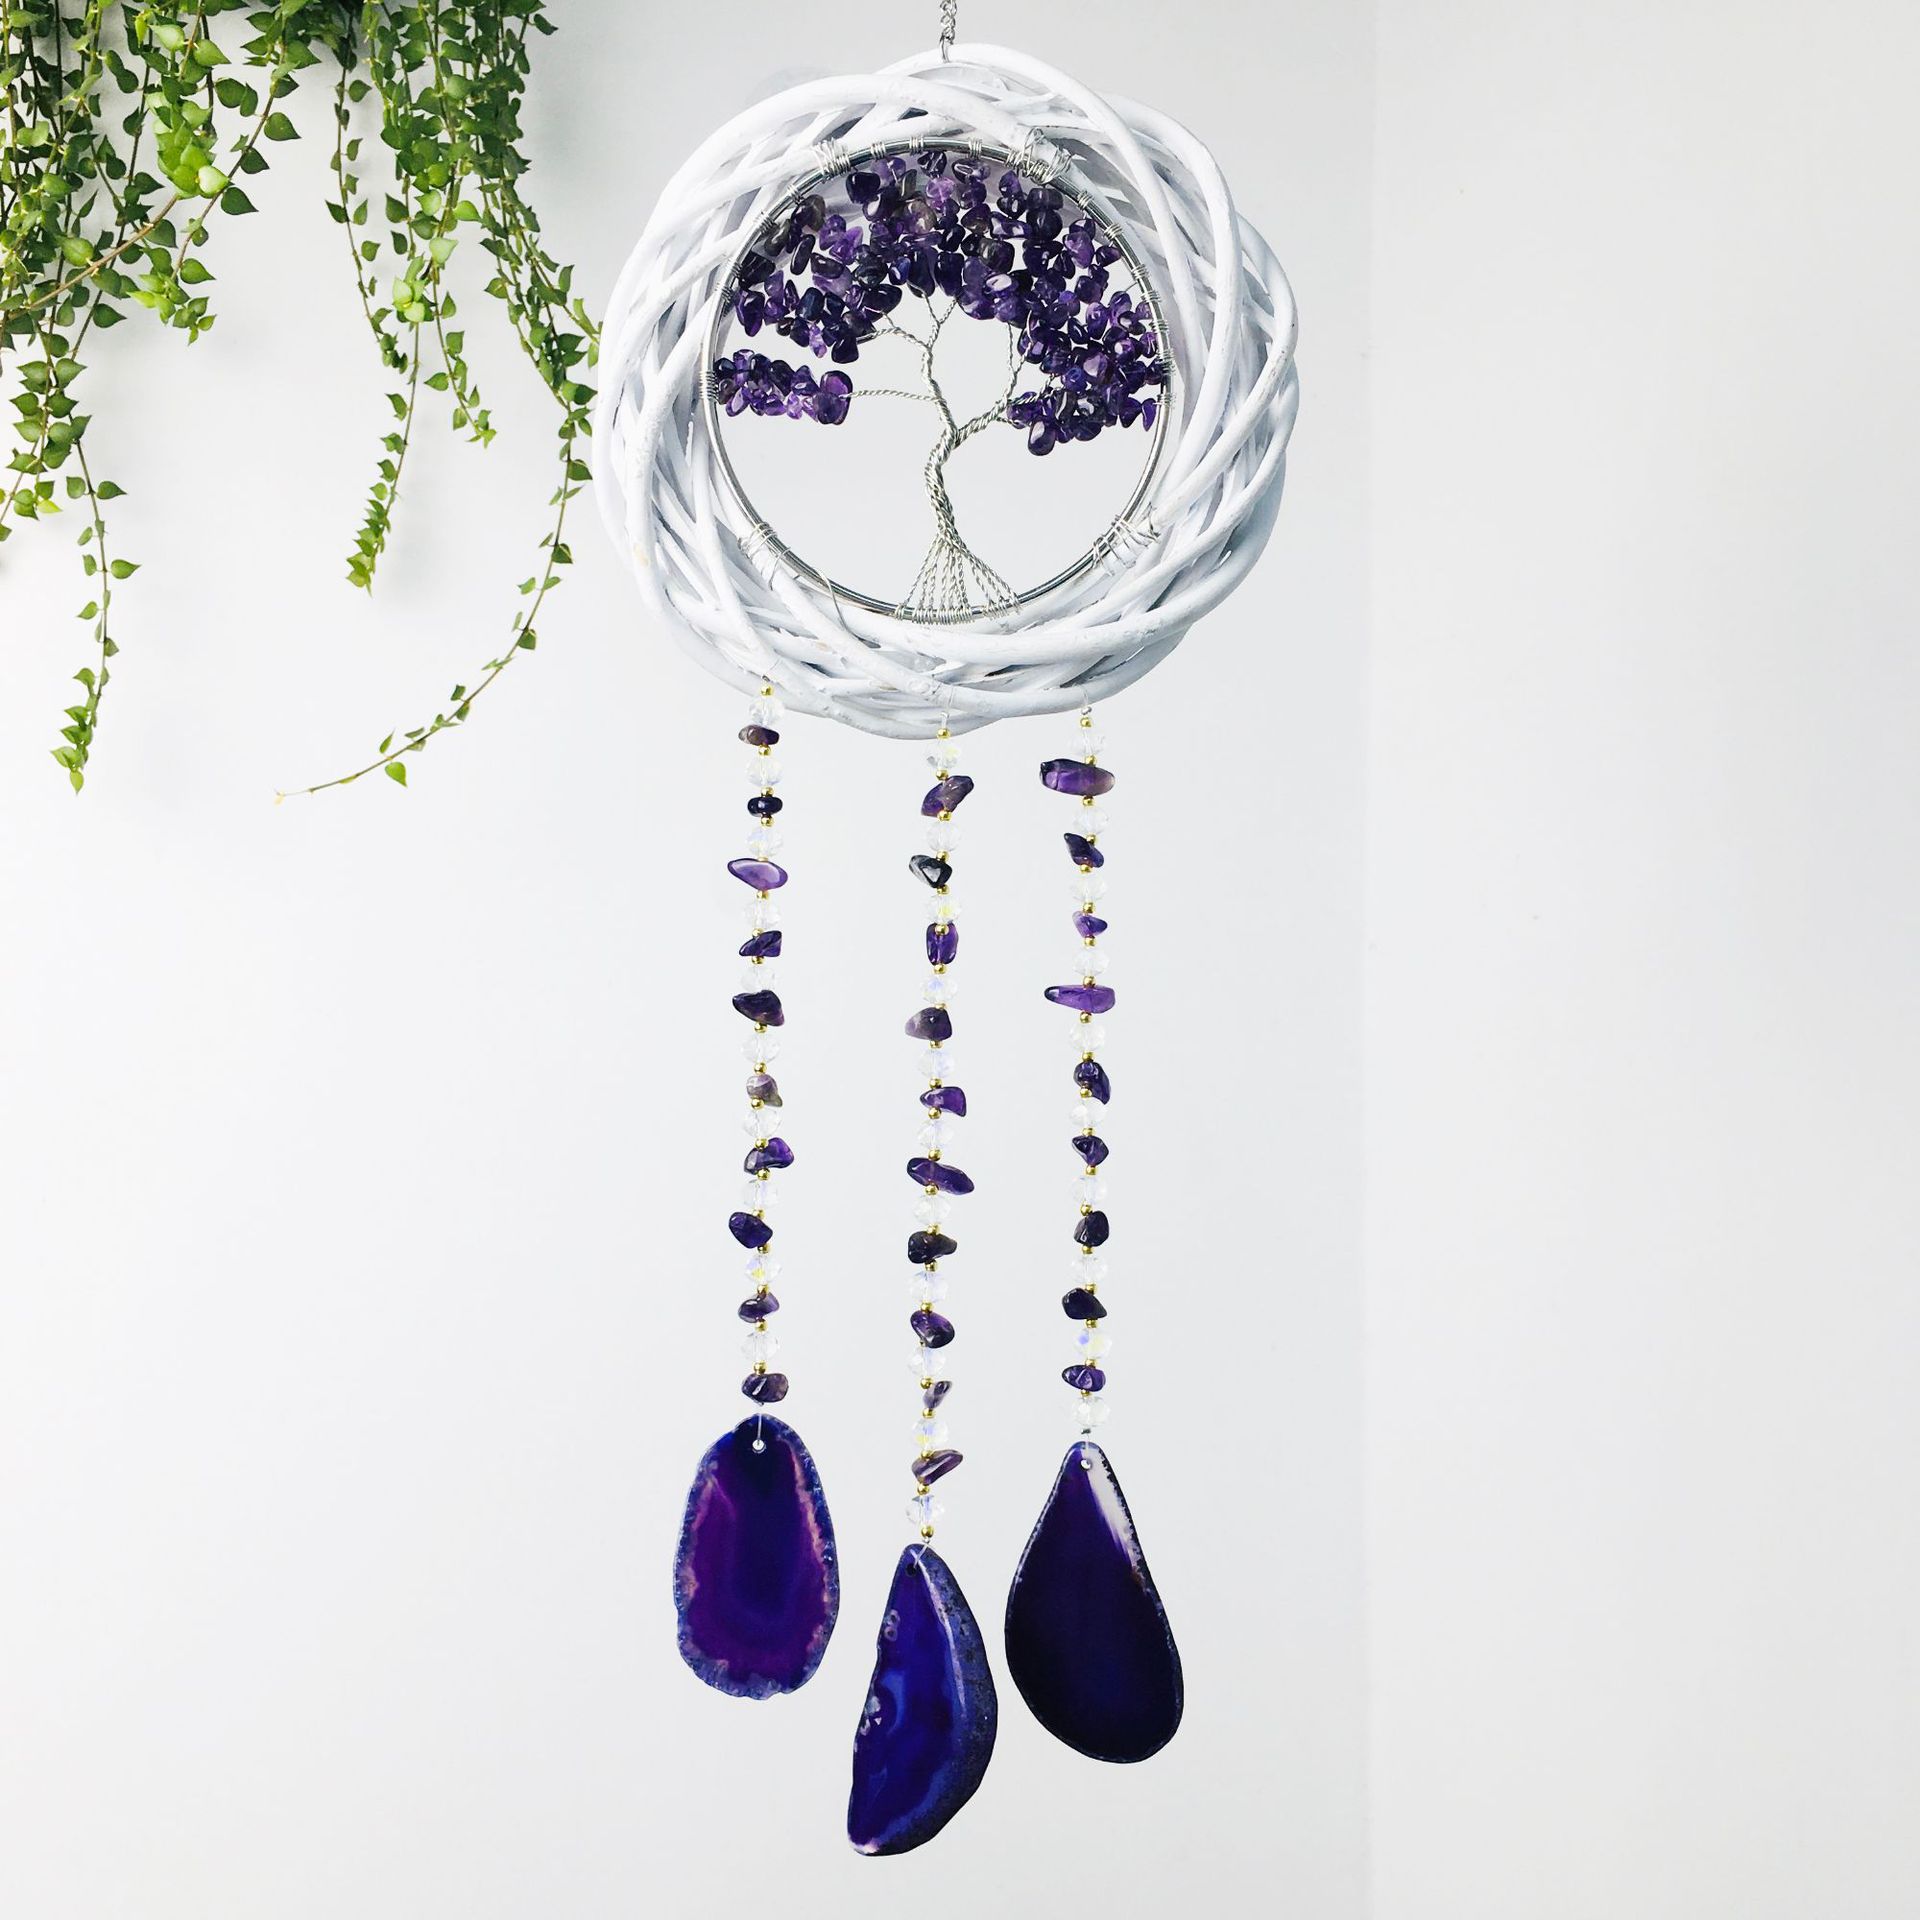 Handcrafted Amethyst Life Tree Agate Wind Chime Wall Decor – Natural Elegance